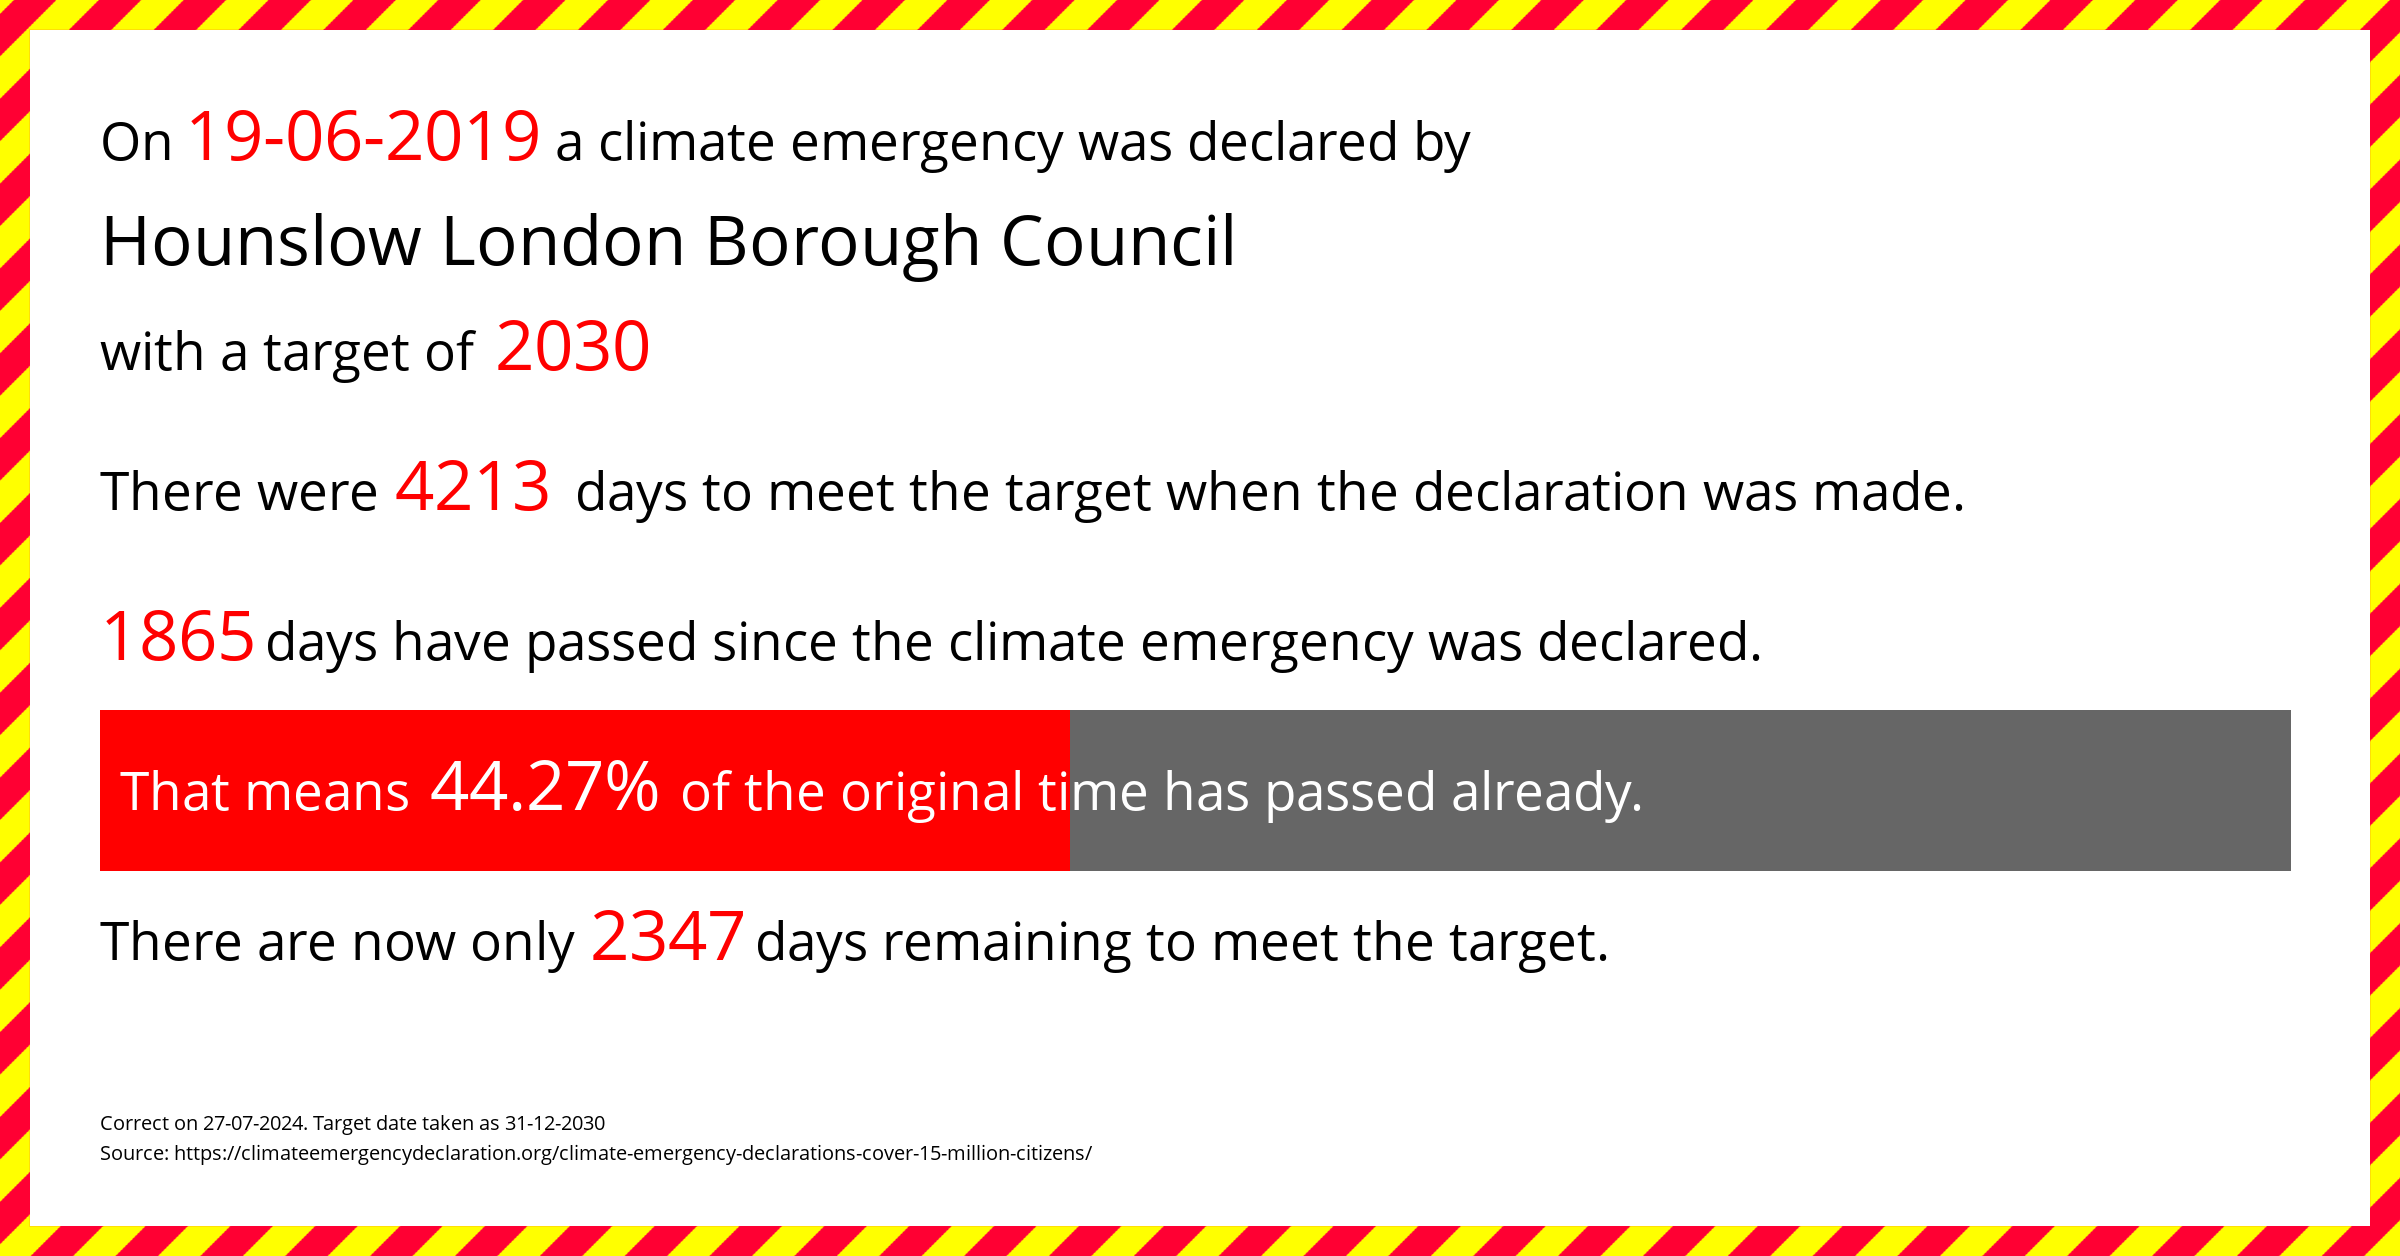 Hounslow London Borough Council declared a Climate emergency on Wednesday 19th June 2019, with a target of 2030.